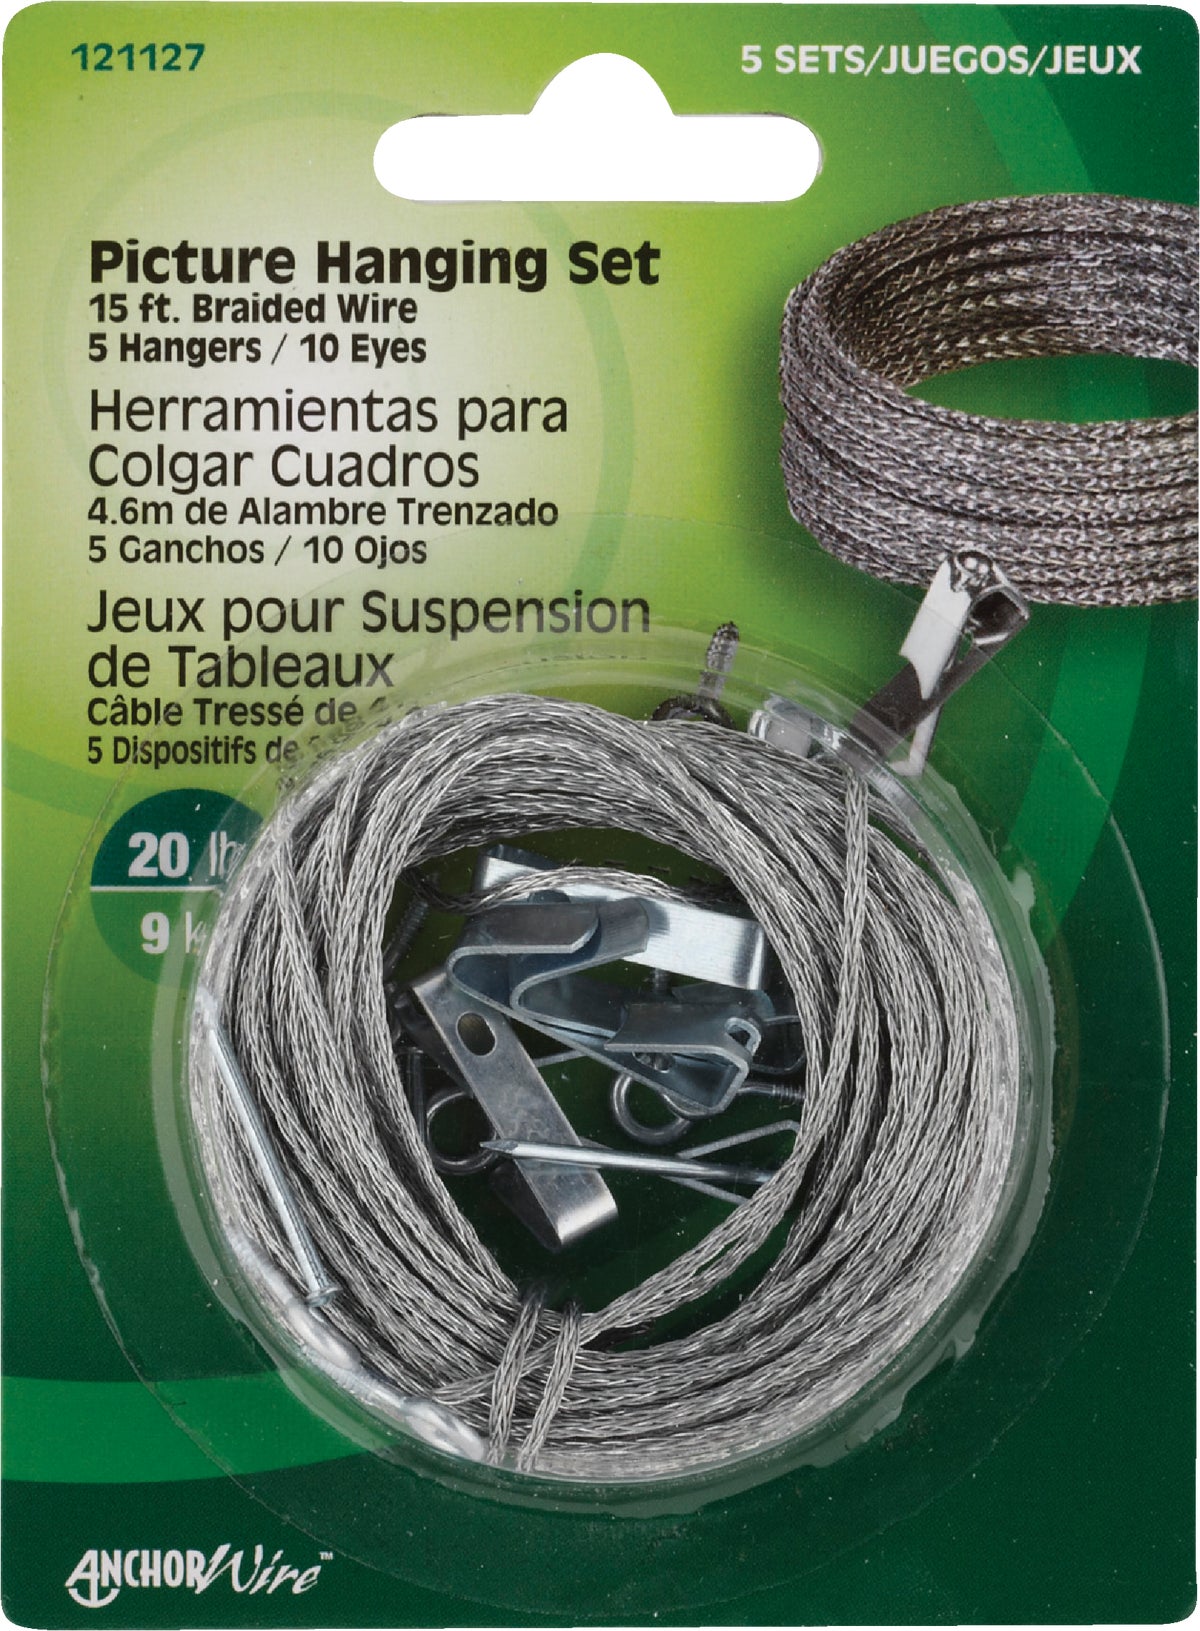 Buy Hillman Anchor Wire Heavy-Duty Mirror And Picture Hanger Kit 100 Lb.  (Pack of 5)